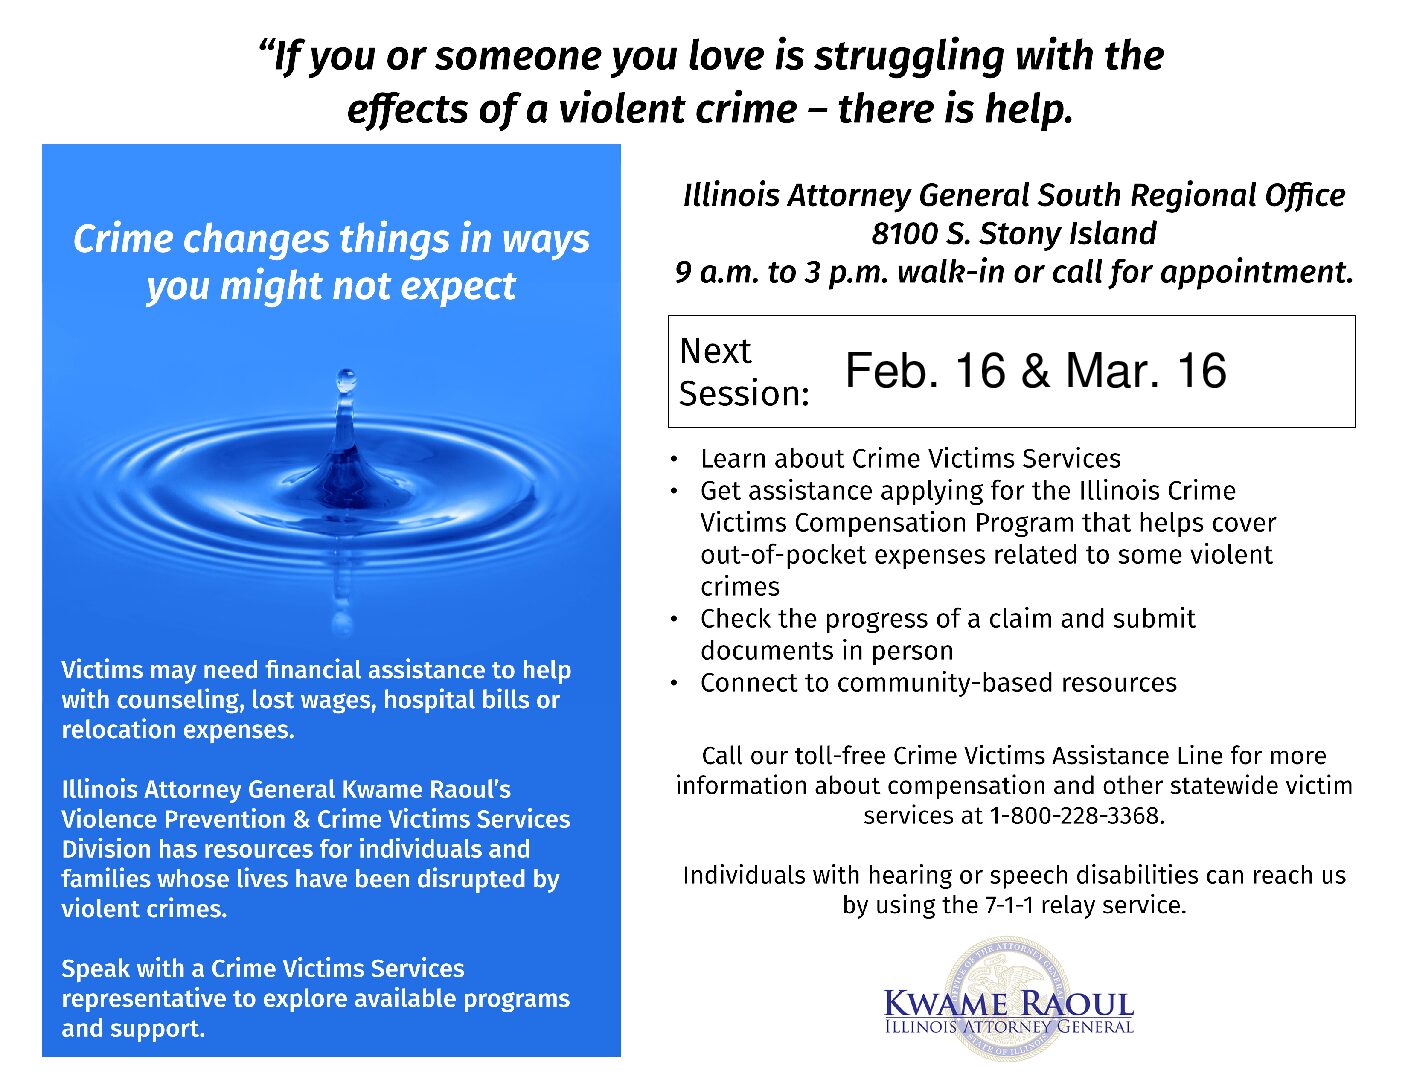 Picture of flyer for Community Outreach for Crime Victim Services from IL Attorney General Kwame Raoul